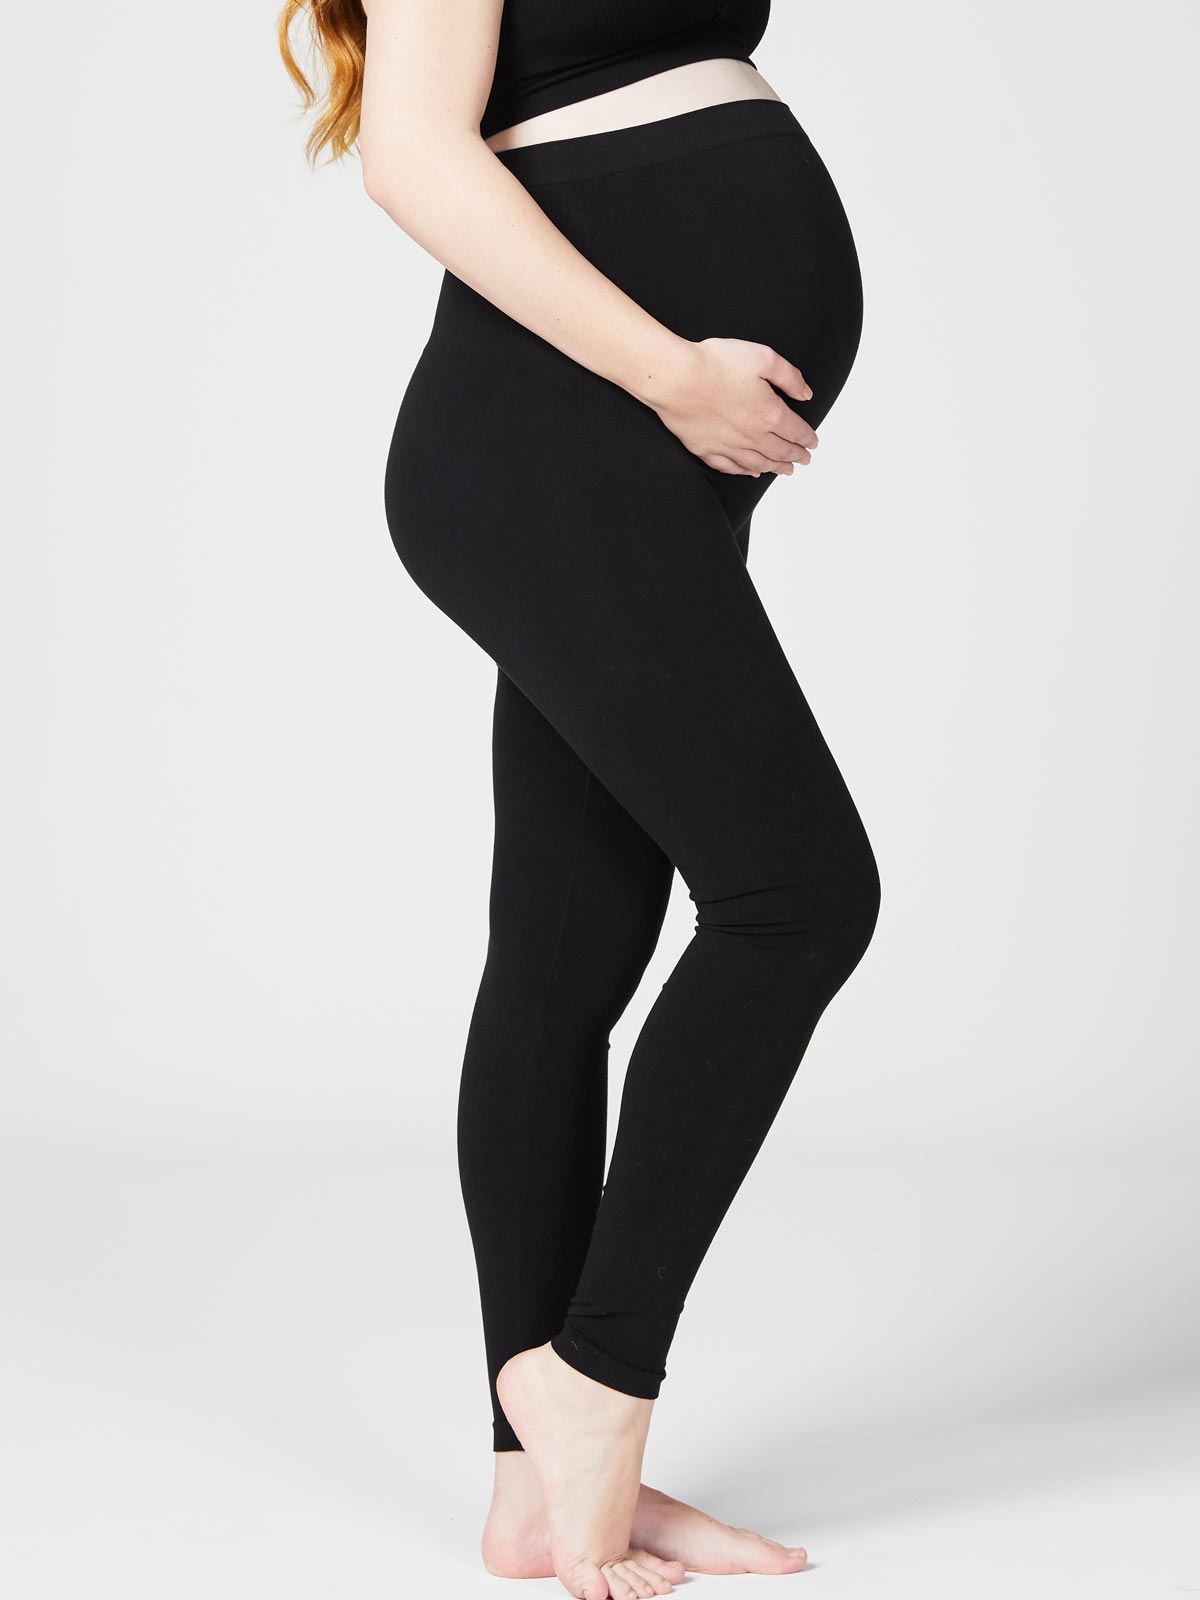 STYLE THE BUMP: Yummy Mummy Maternity Belly Band and Extra Length Leggings.  - Just A Mamma